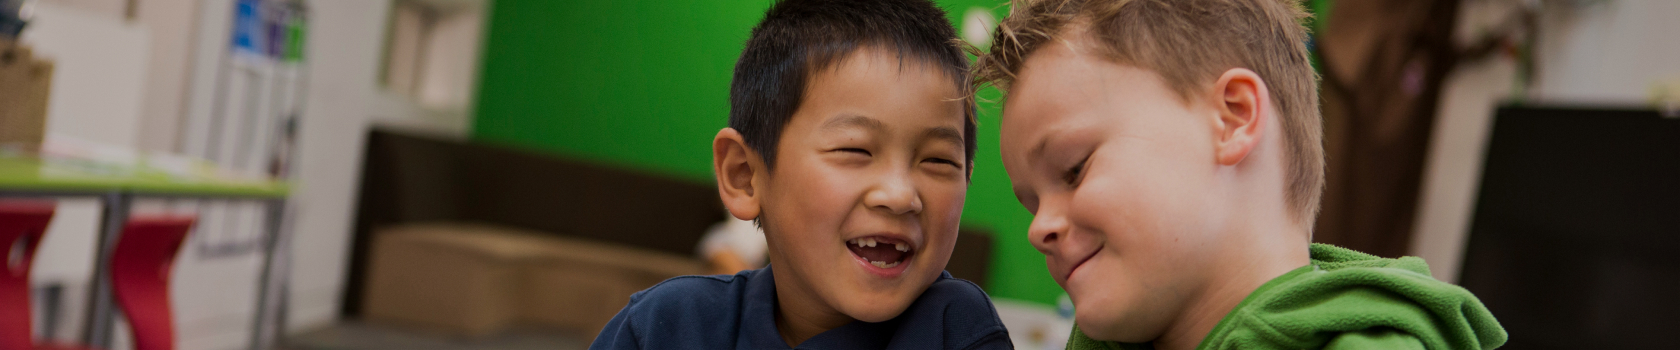 Two young boys laughing while at school